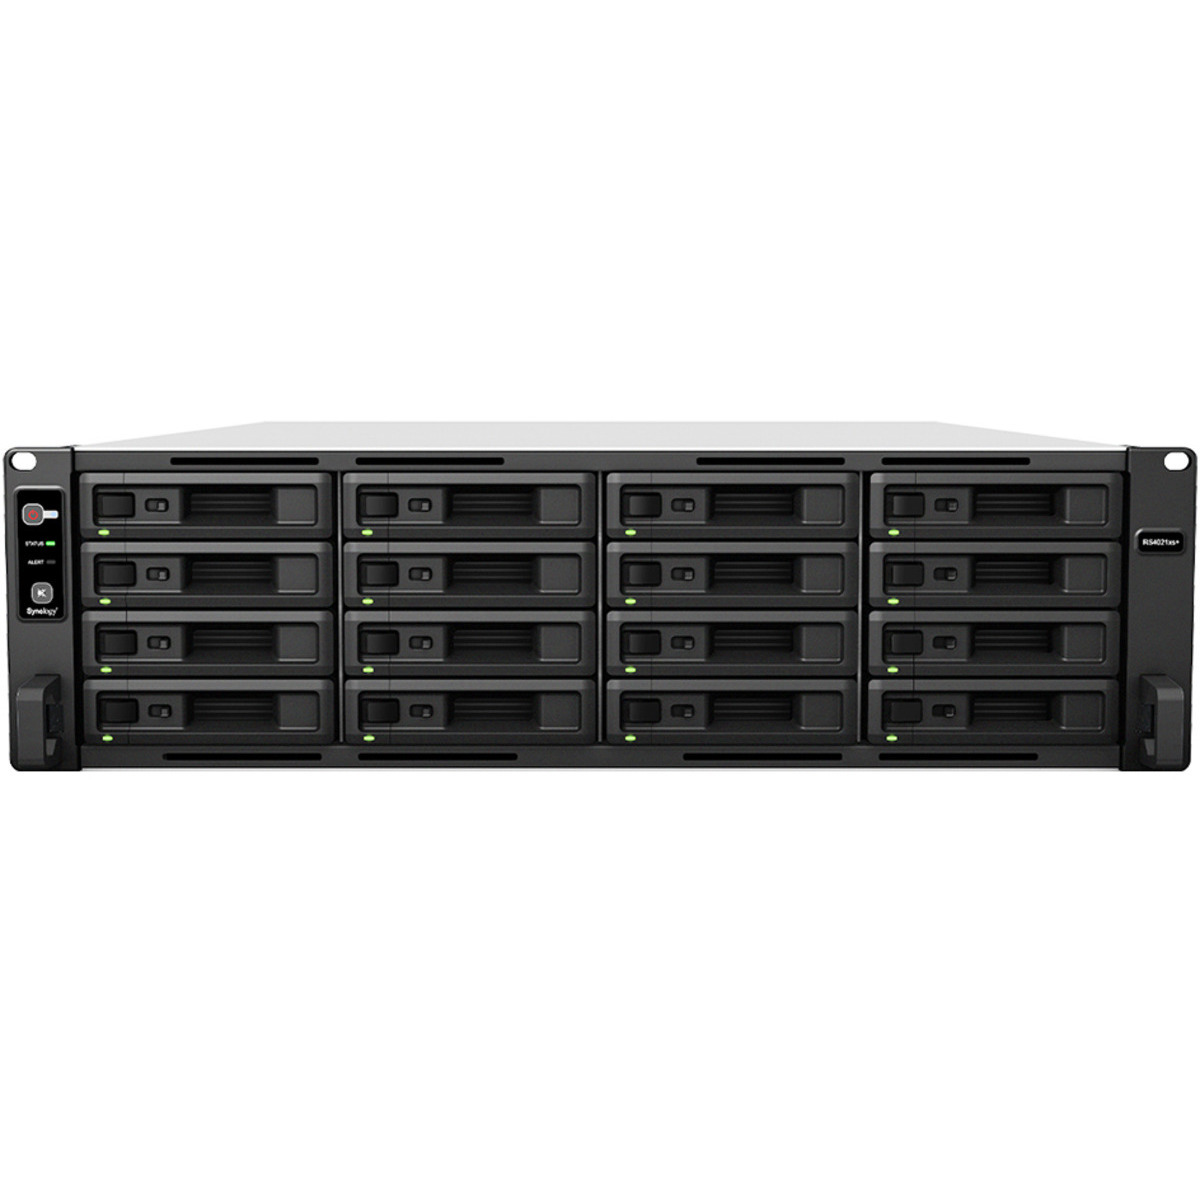 Synology RackStation RS4021xs+ 256tb 16-Bay RackMount Large Business / Enterprise NAS - Network Attached Storage Device 16x16tb Synology HAT5300 Series HAT5300-16T 3.5 7200rpm SATA 6Gb/s HDD ENTERPRISE Class Drives Installed - Burn-In Tested RackStation RS4021xs+